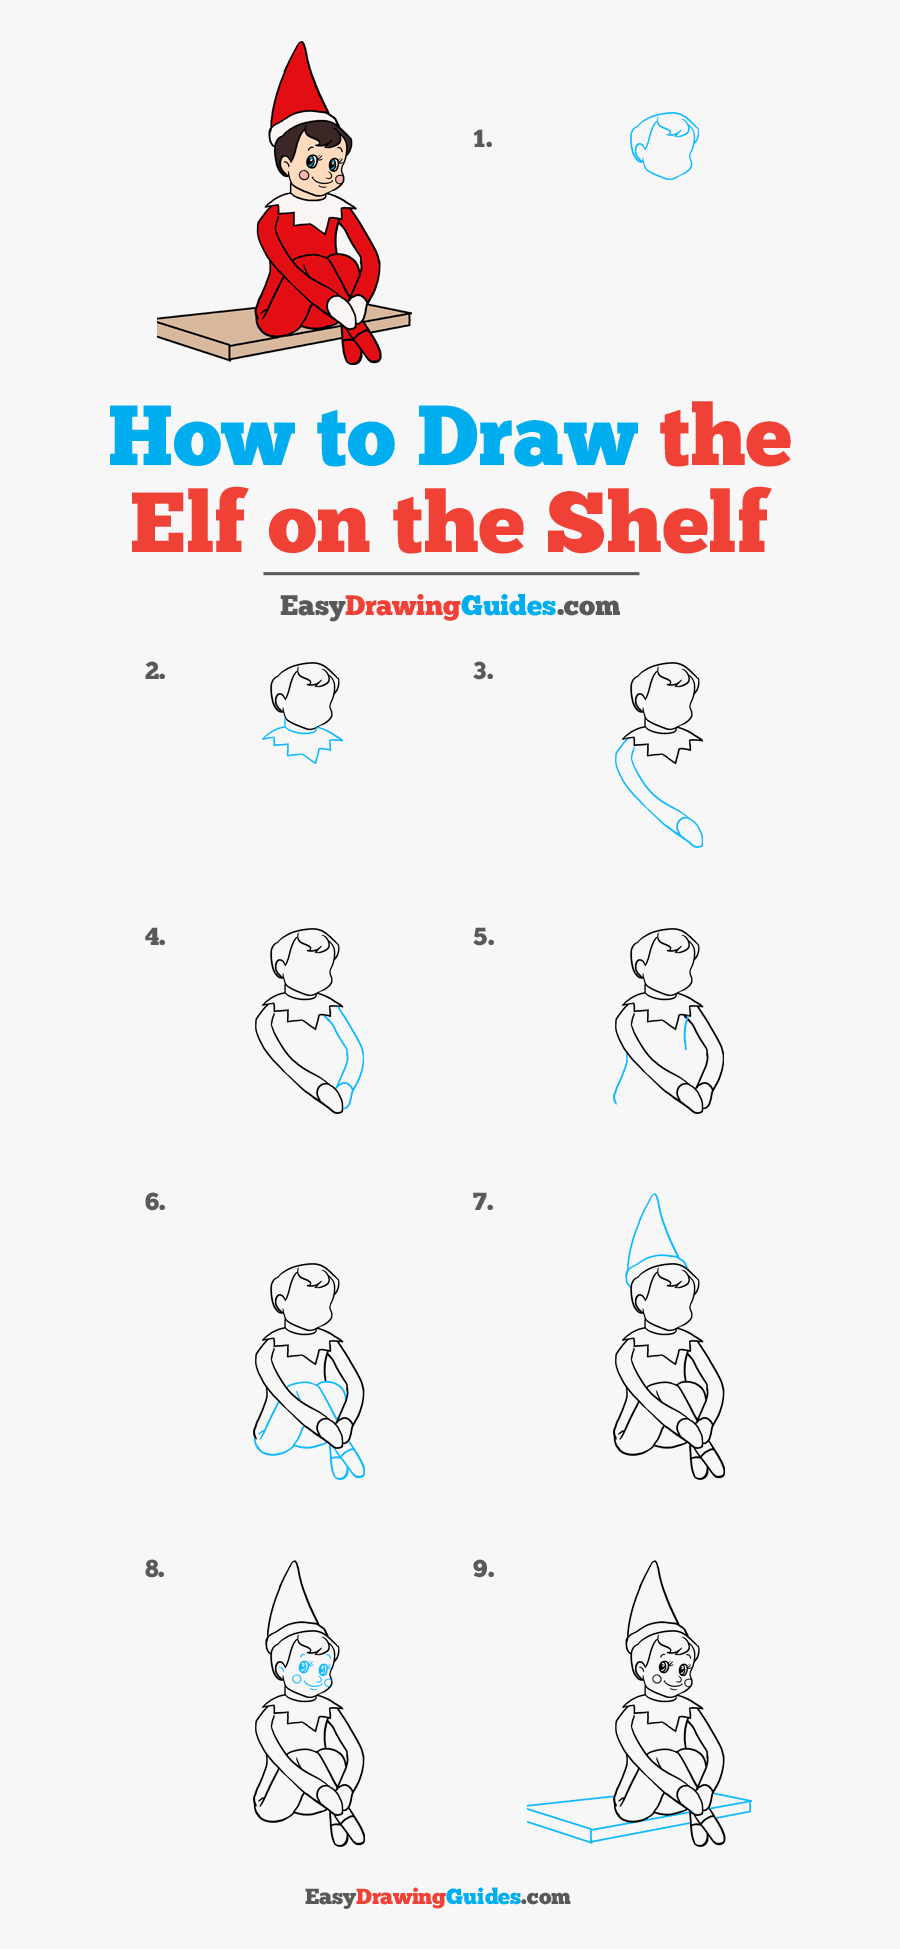 How To Draw Elf On The Shelf - Like Us Follow Us, Transparent Clipart